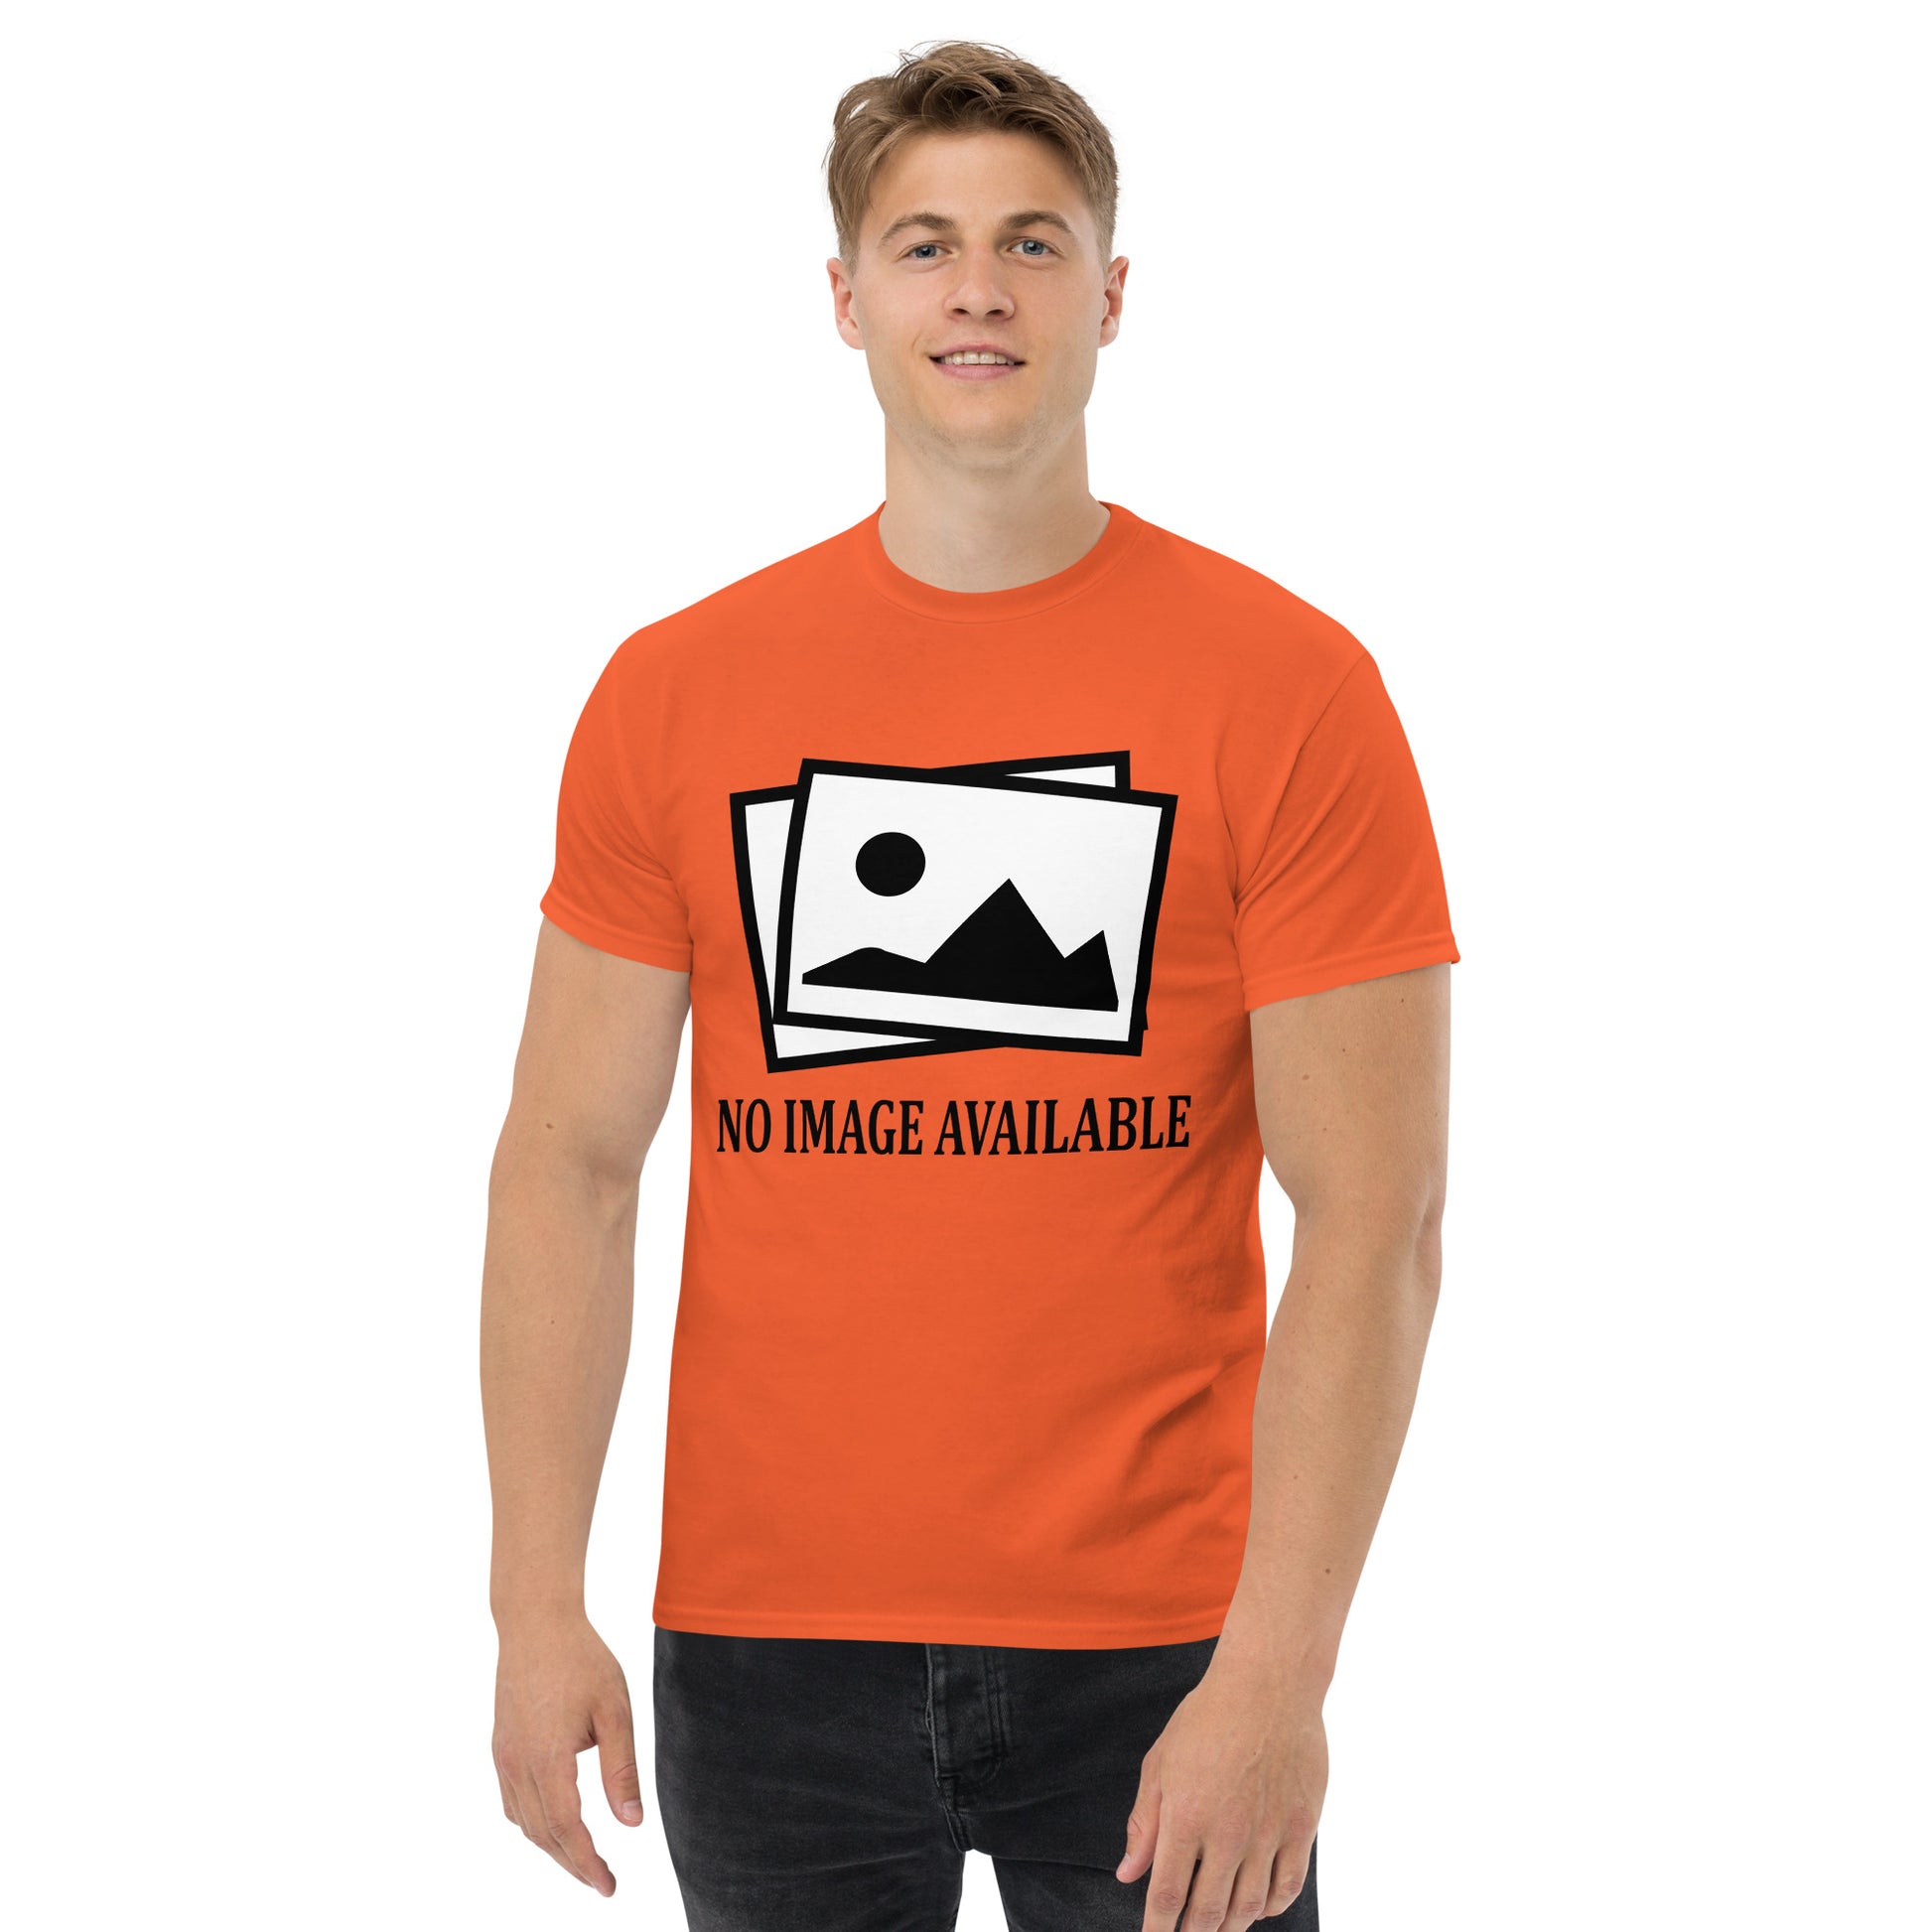 Men with orange t-shirt with image and text "no image available"